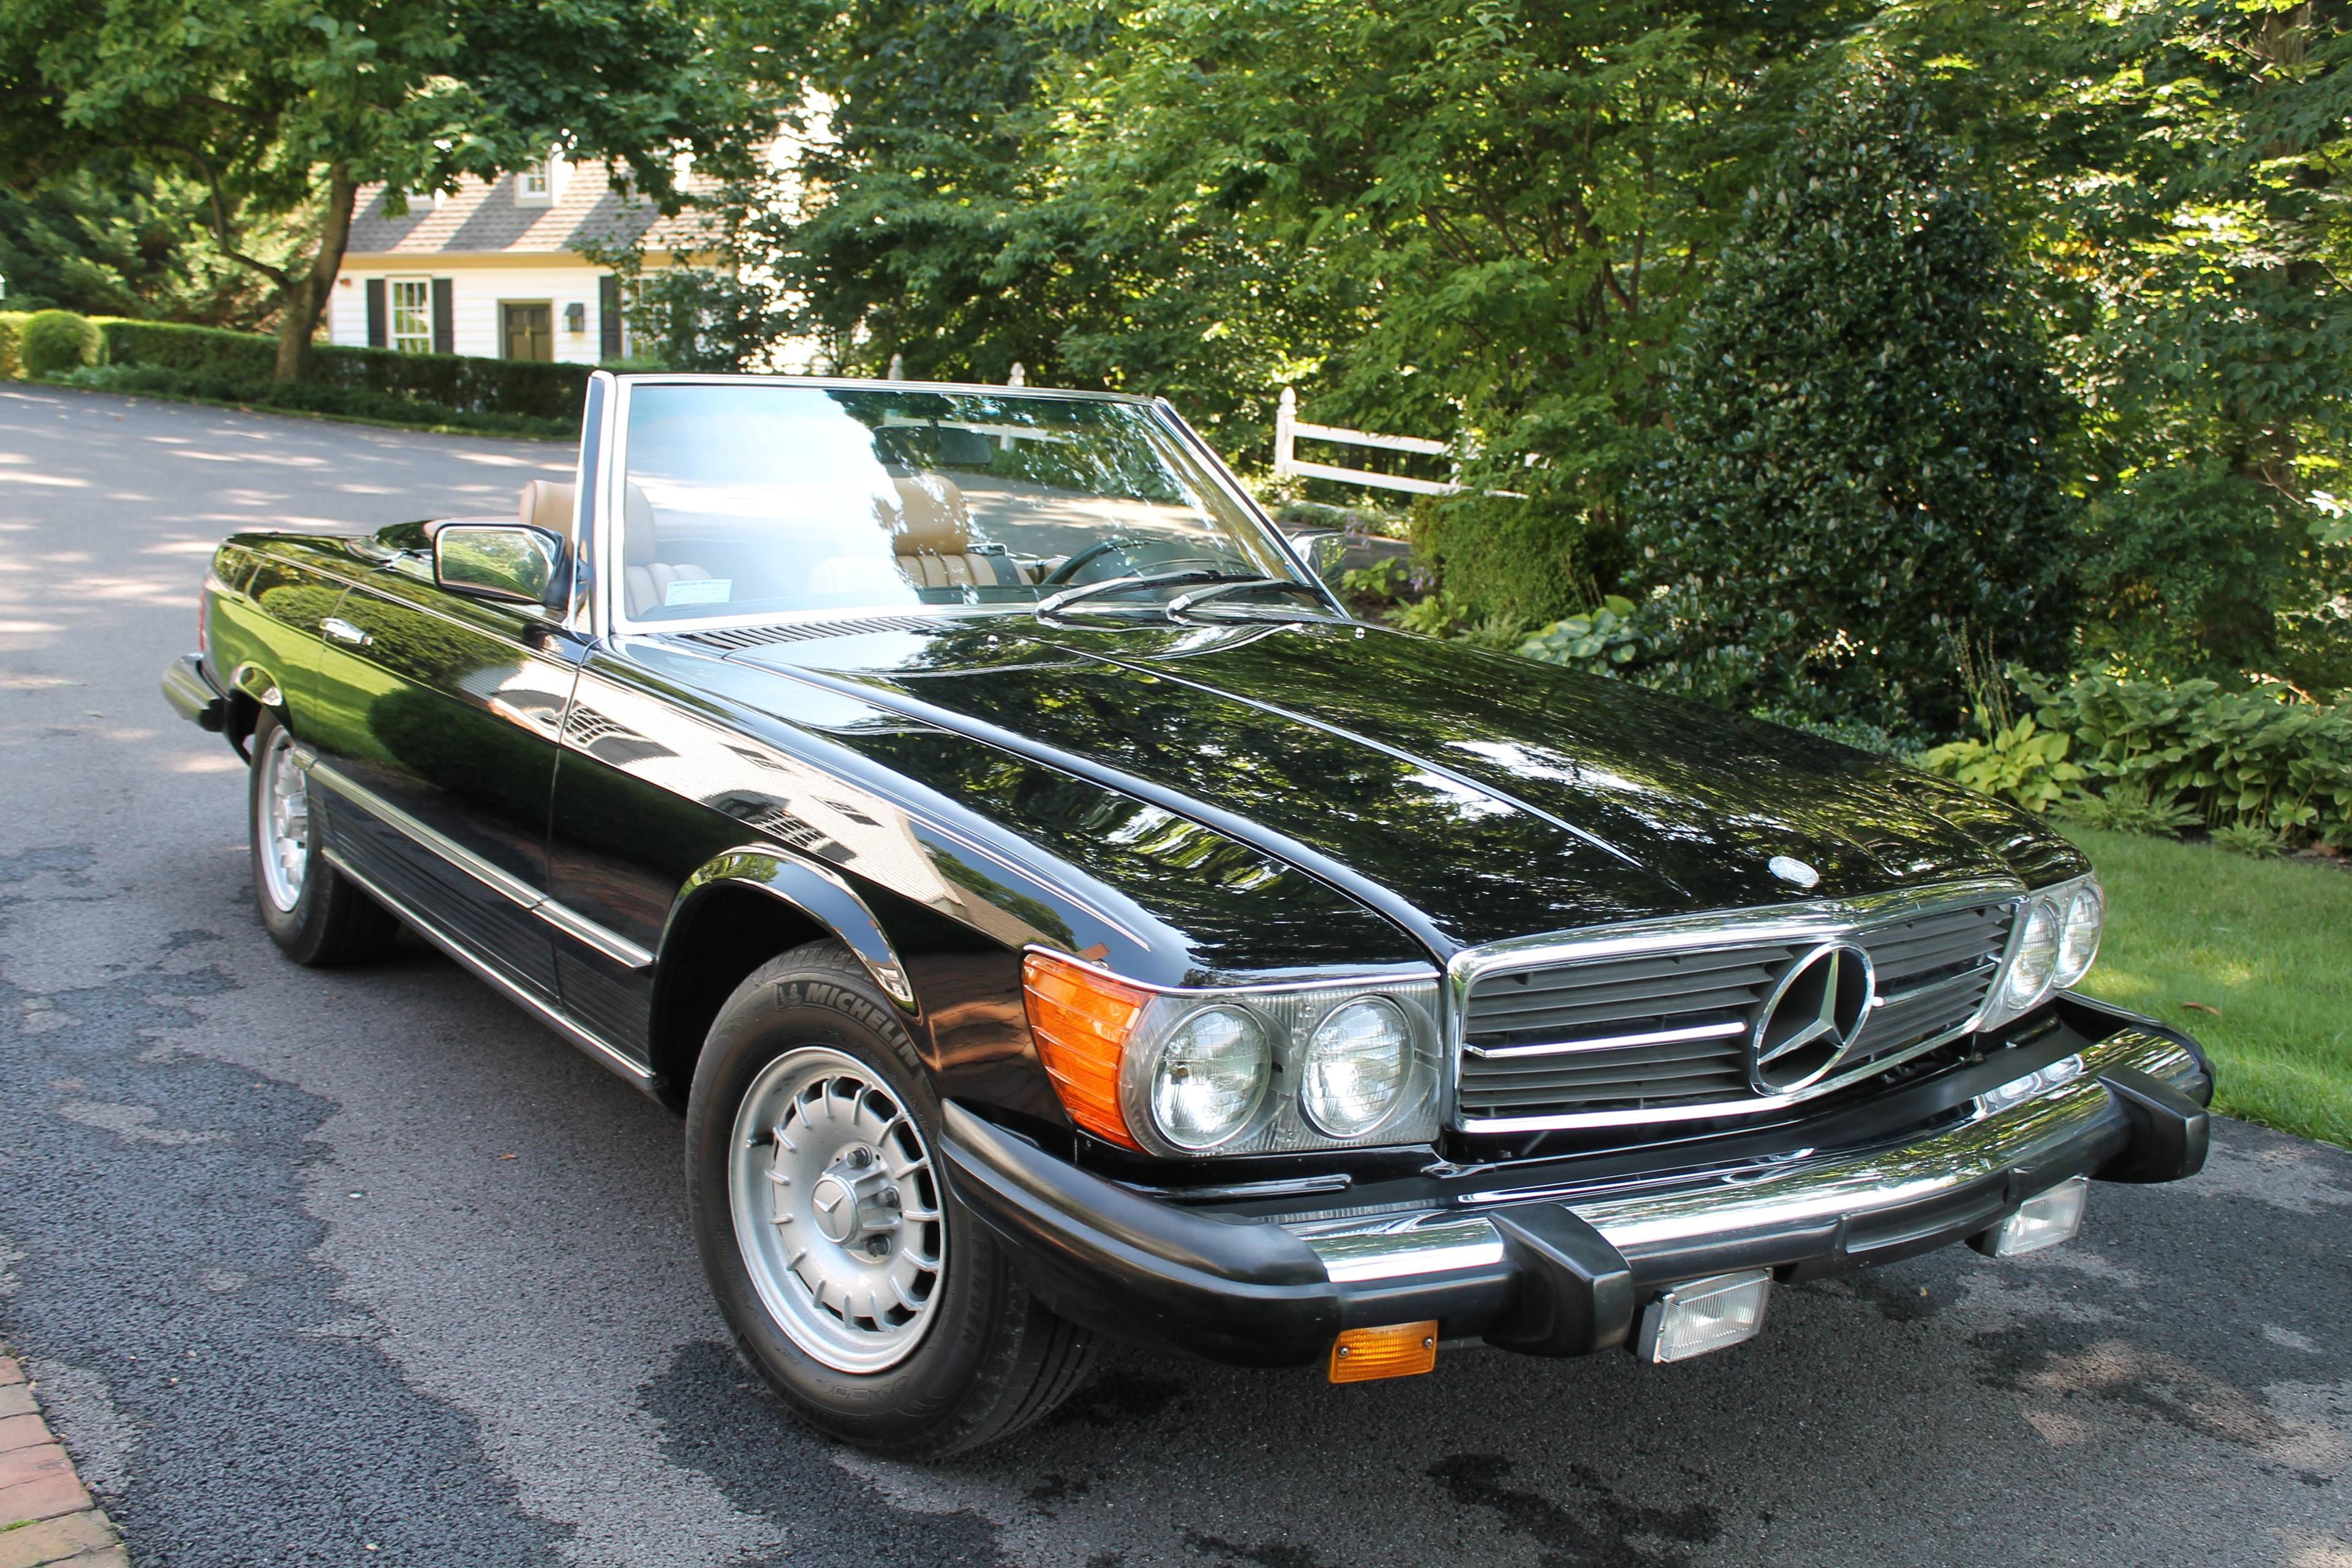 1983 Mercedes-Benz 380 SL Convertible. 83,000 actual miles as stated on tit